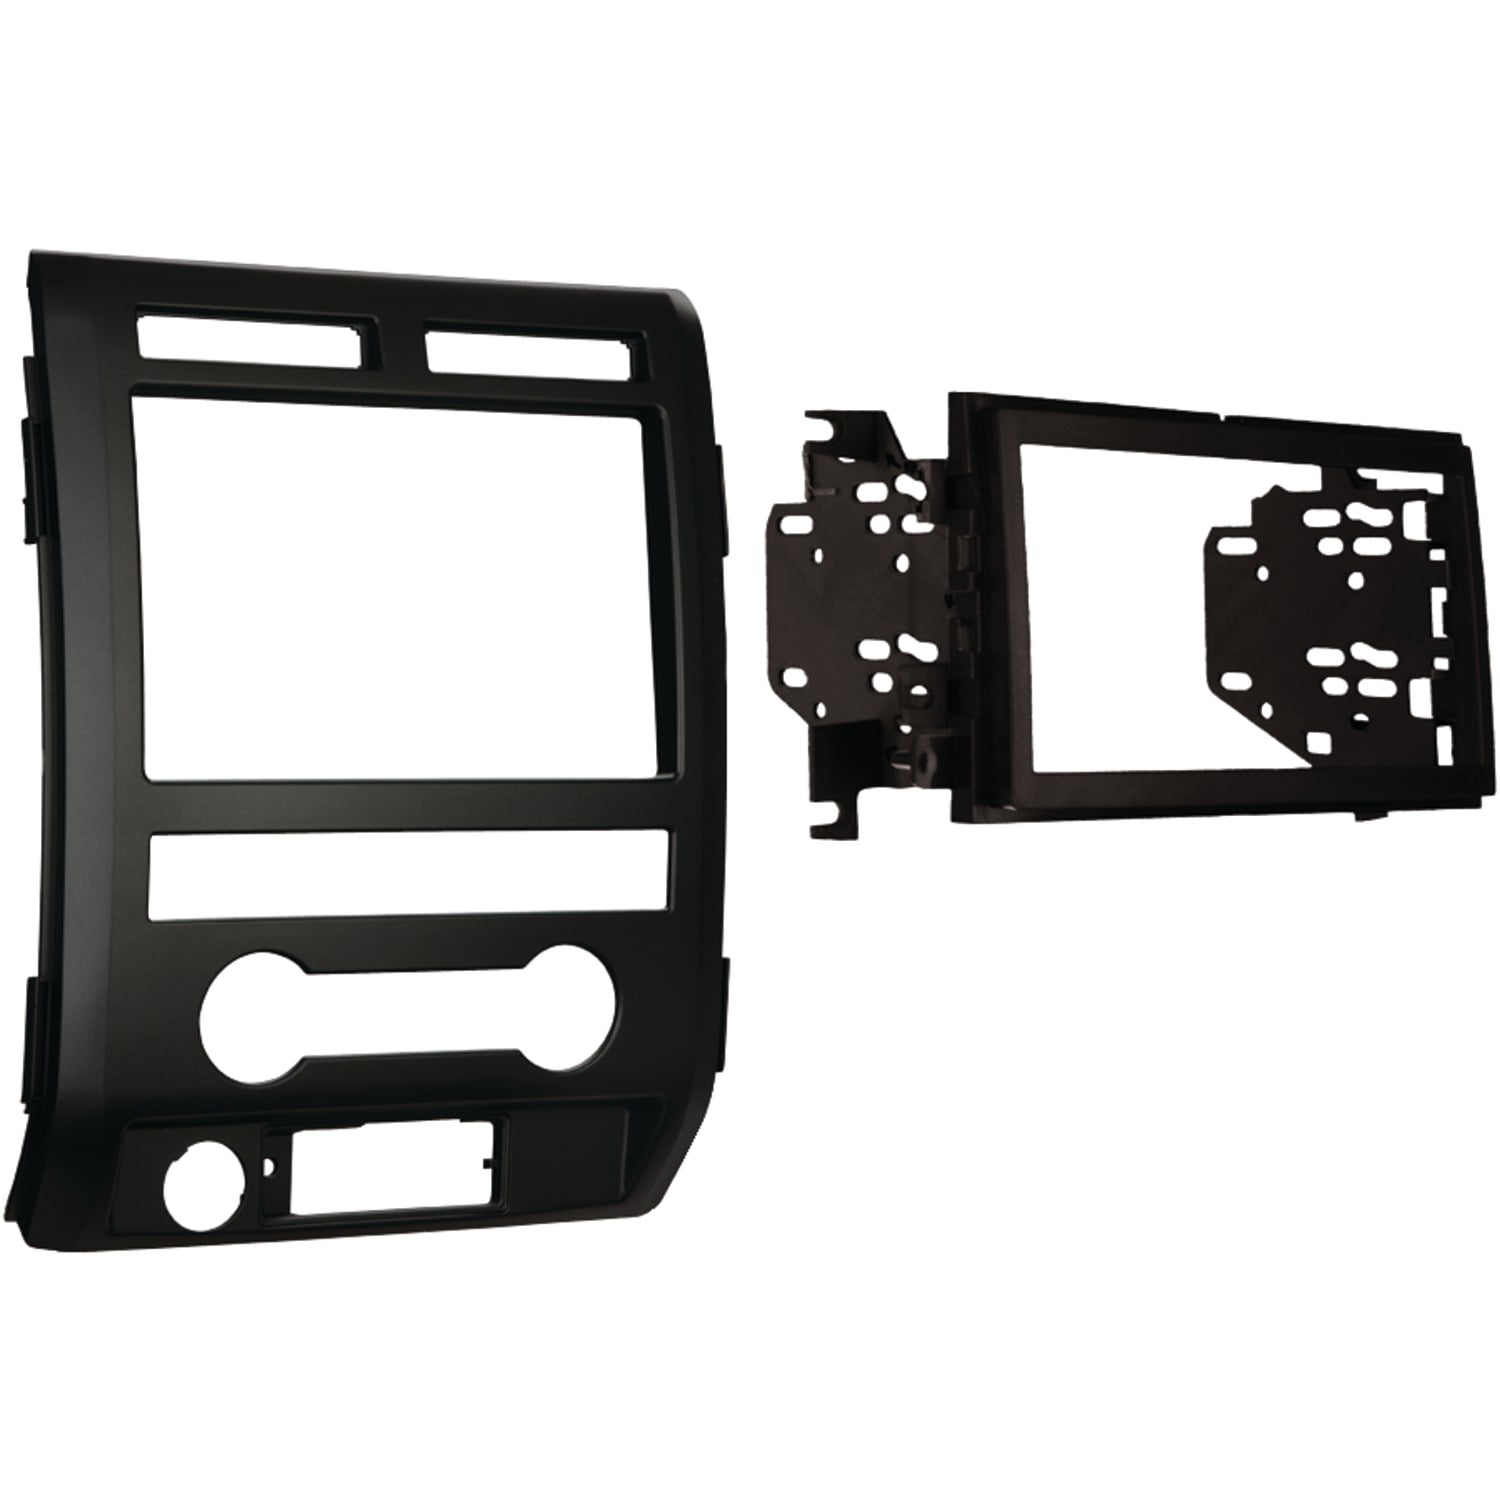 METRA 95-8235CHG INSTALLATION DOUBLE DIN KIT FOR 2012-UP TOYOTA TACOMA VEHICLES 